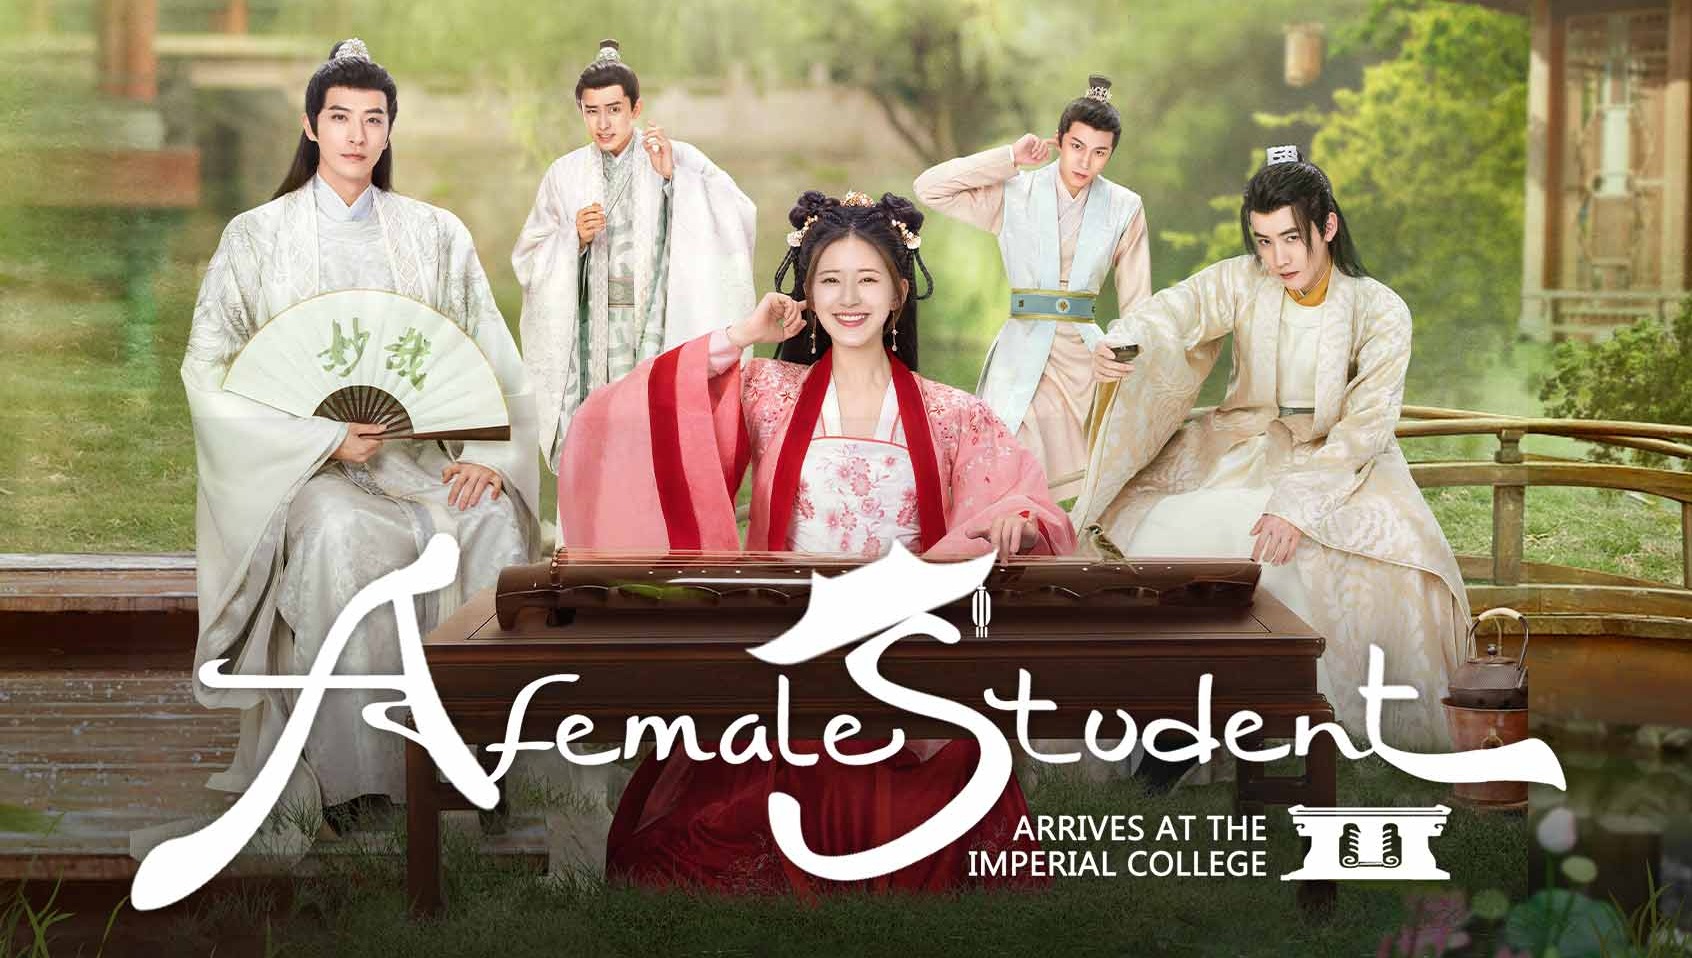 The imperial a student female college arrives at Drama China